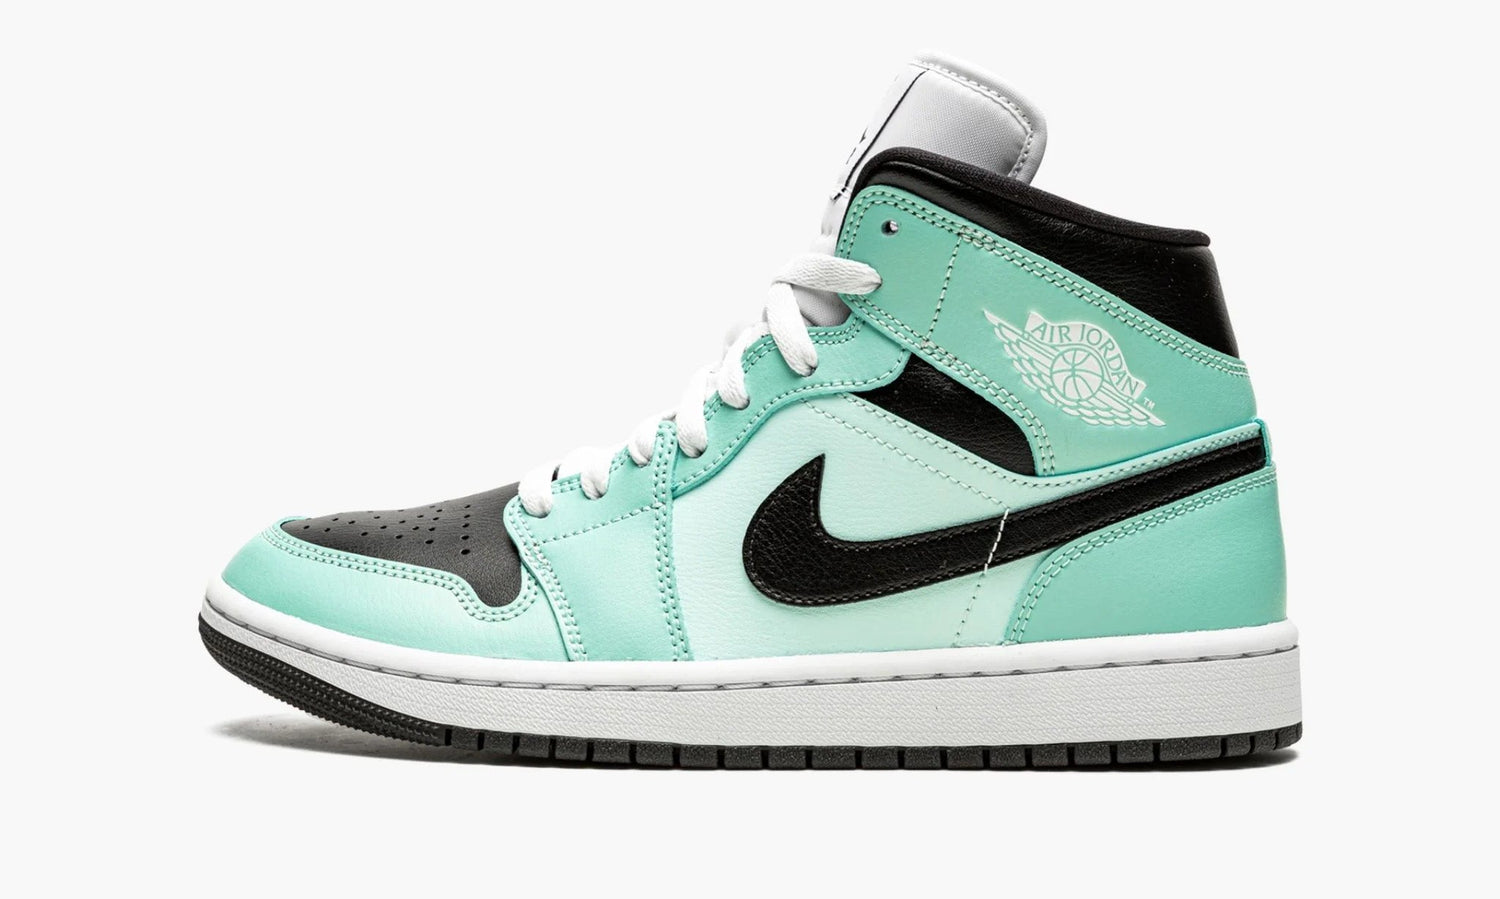 blue and turquoise jordans